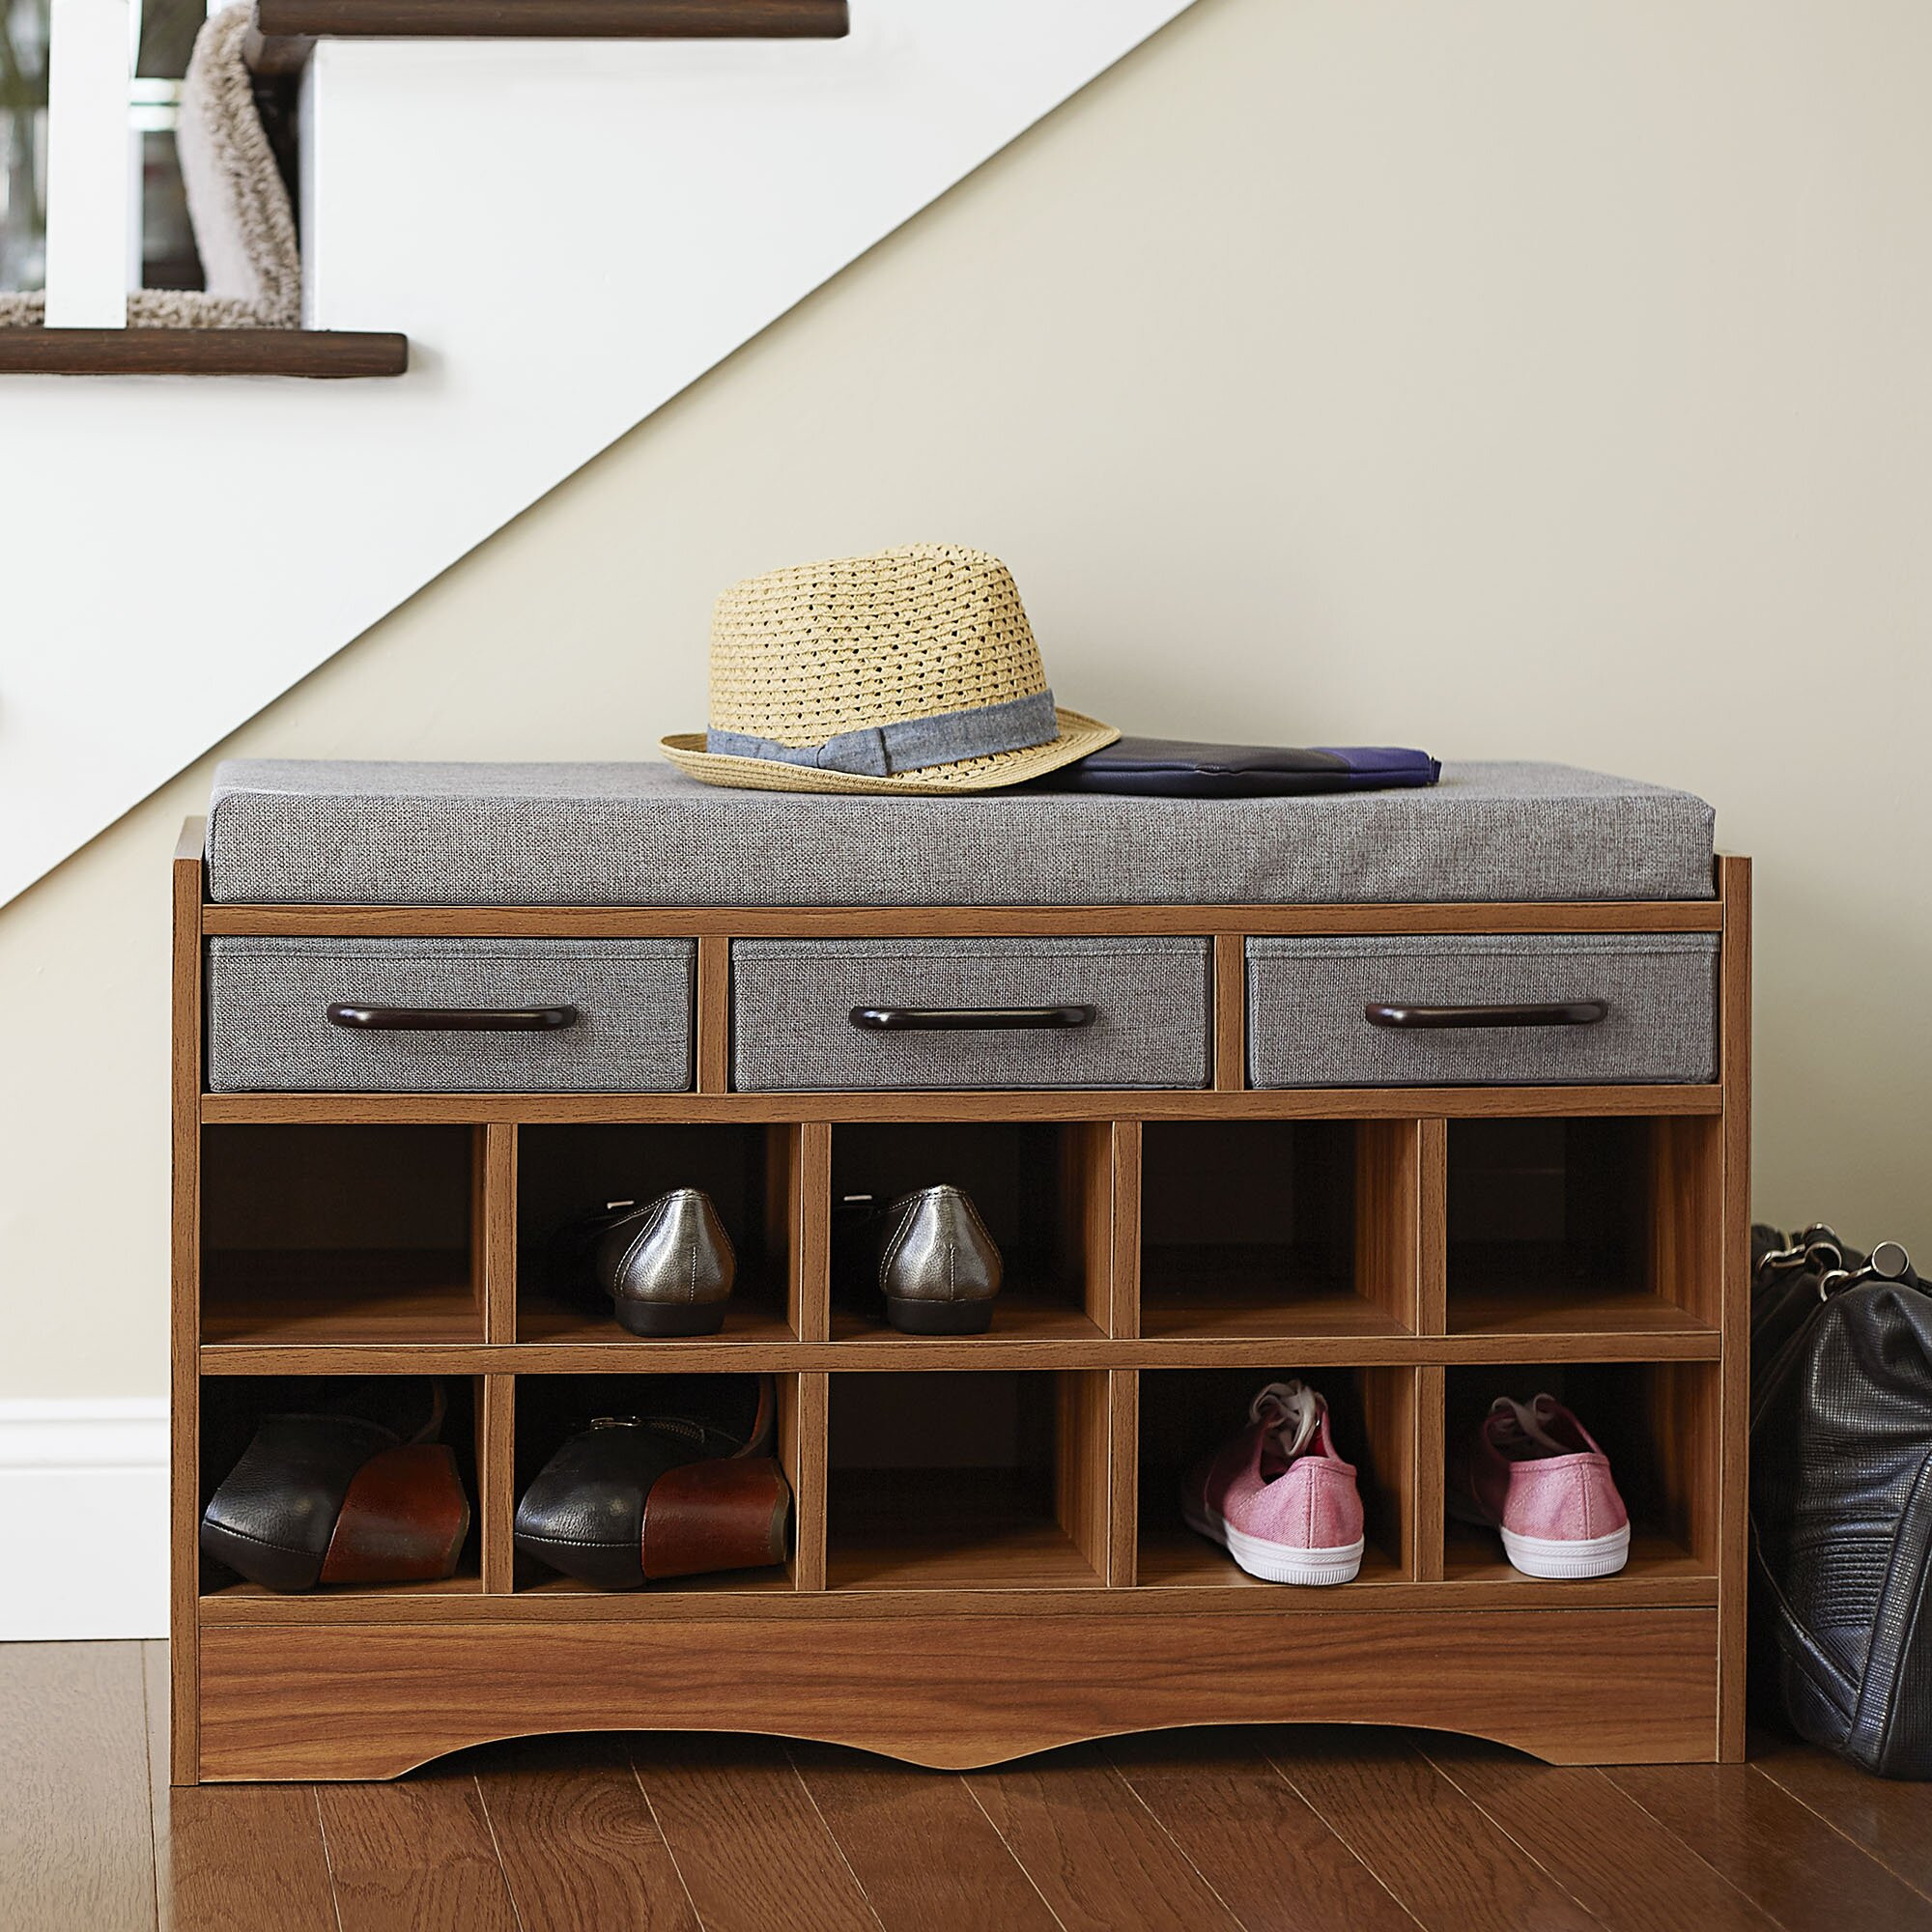 Entryway Bench With Shoe Storage
 Household Essentials Entryway Shoe Storage Bench & Reviews